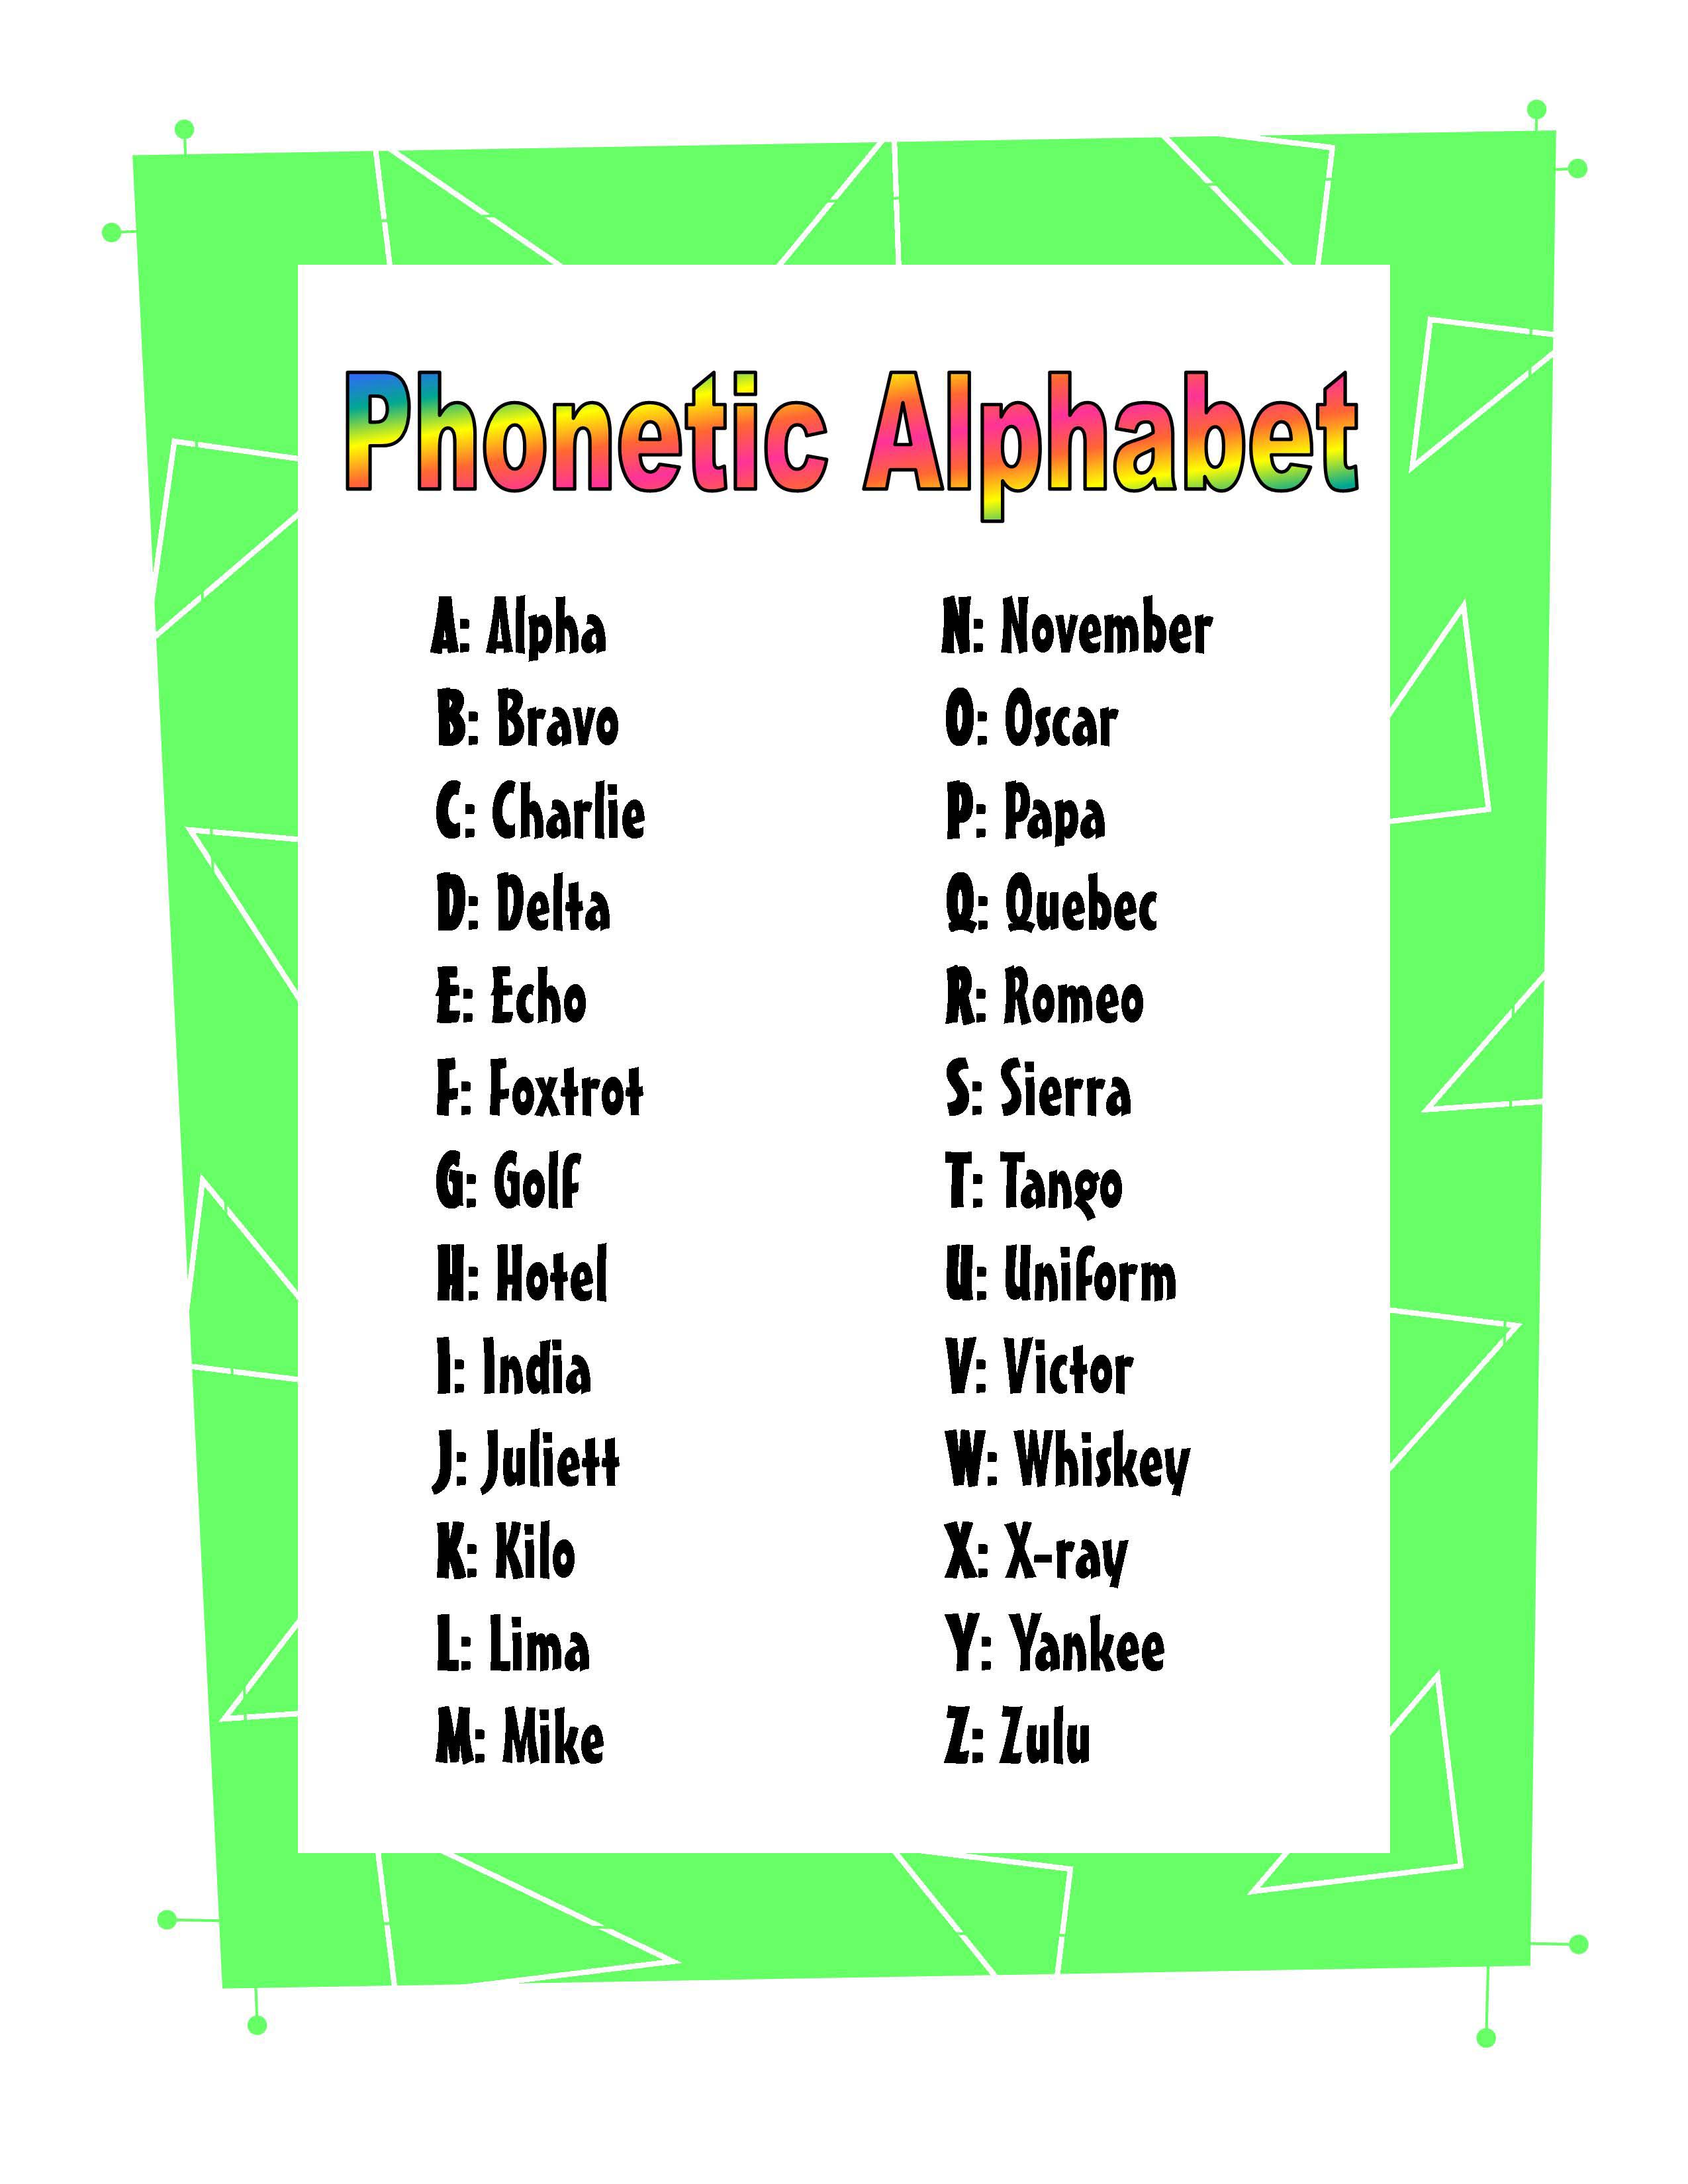 Phonetic Alphabet Chart Poster images